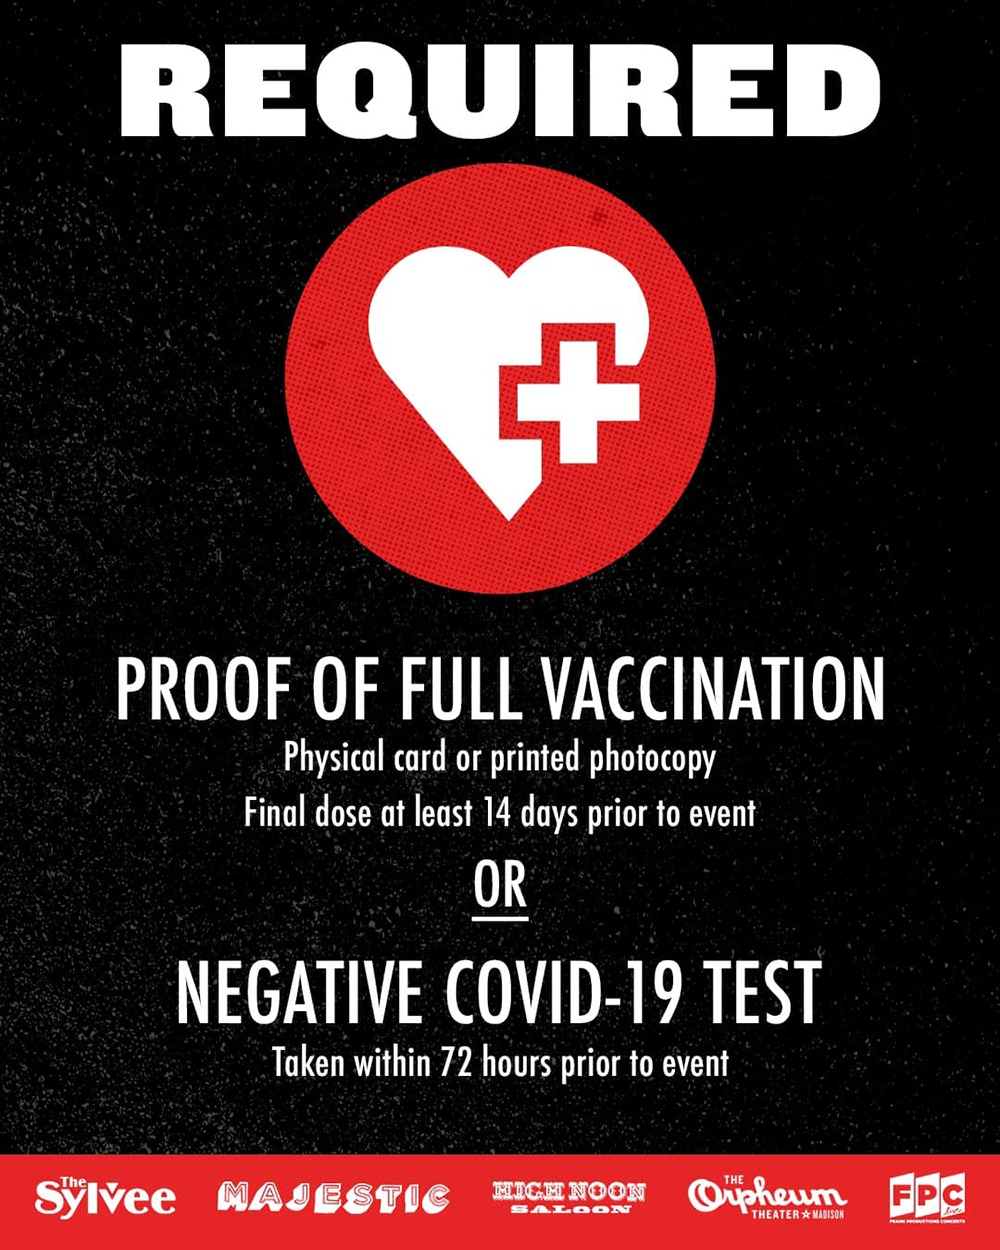 A sign indicates that proof of full vaccination against COVID-19 or a negative COVID-19 test within 72 hours is required to gain entry to several concert venues in Madison, including The Sylvee, Majestic, High Noon Saloon and The Orpheum Theater.